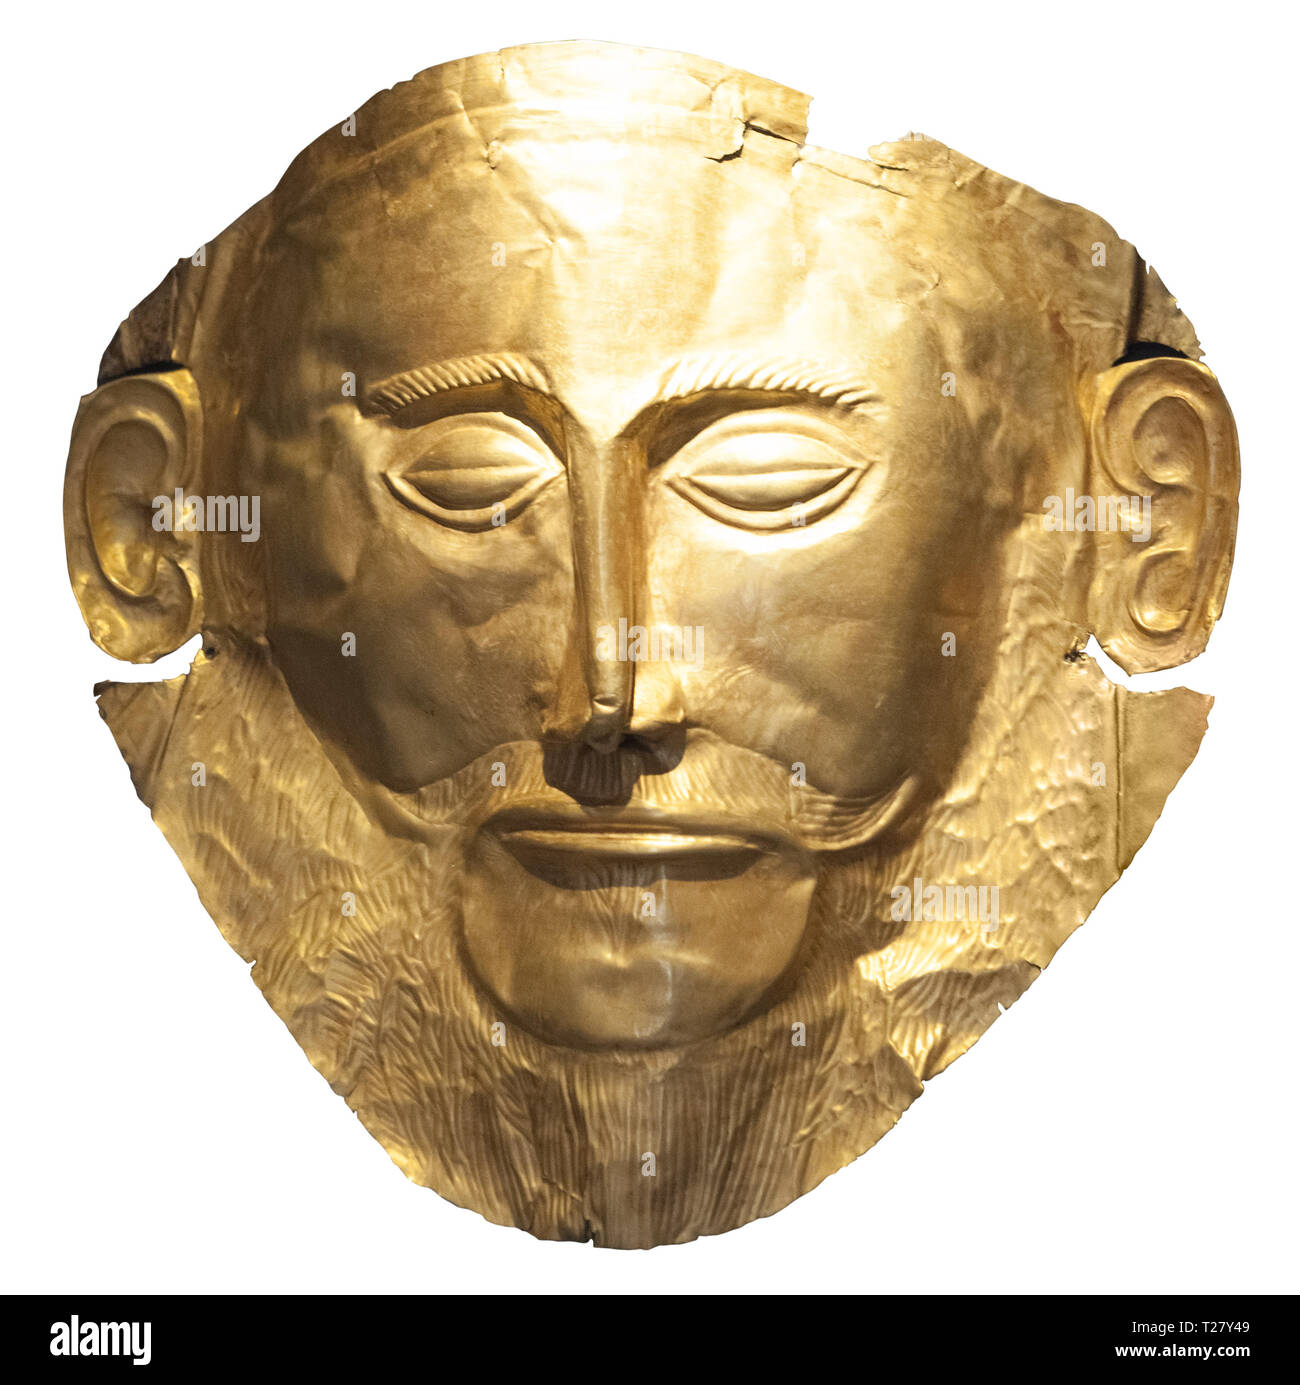 Mask of Agamemnon - gold funeral mask from ancient Greek site of Mycenae on white backgrouns Stock Photo